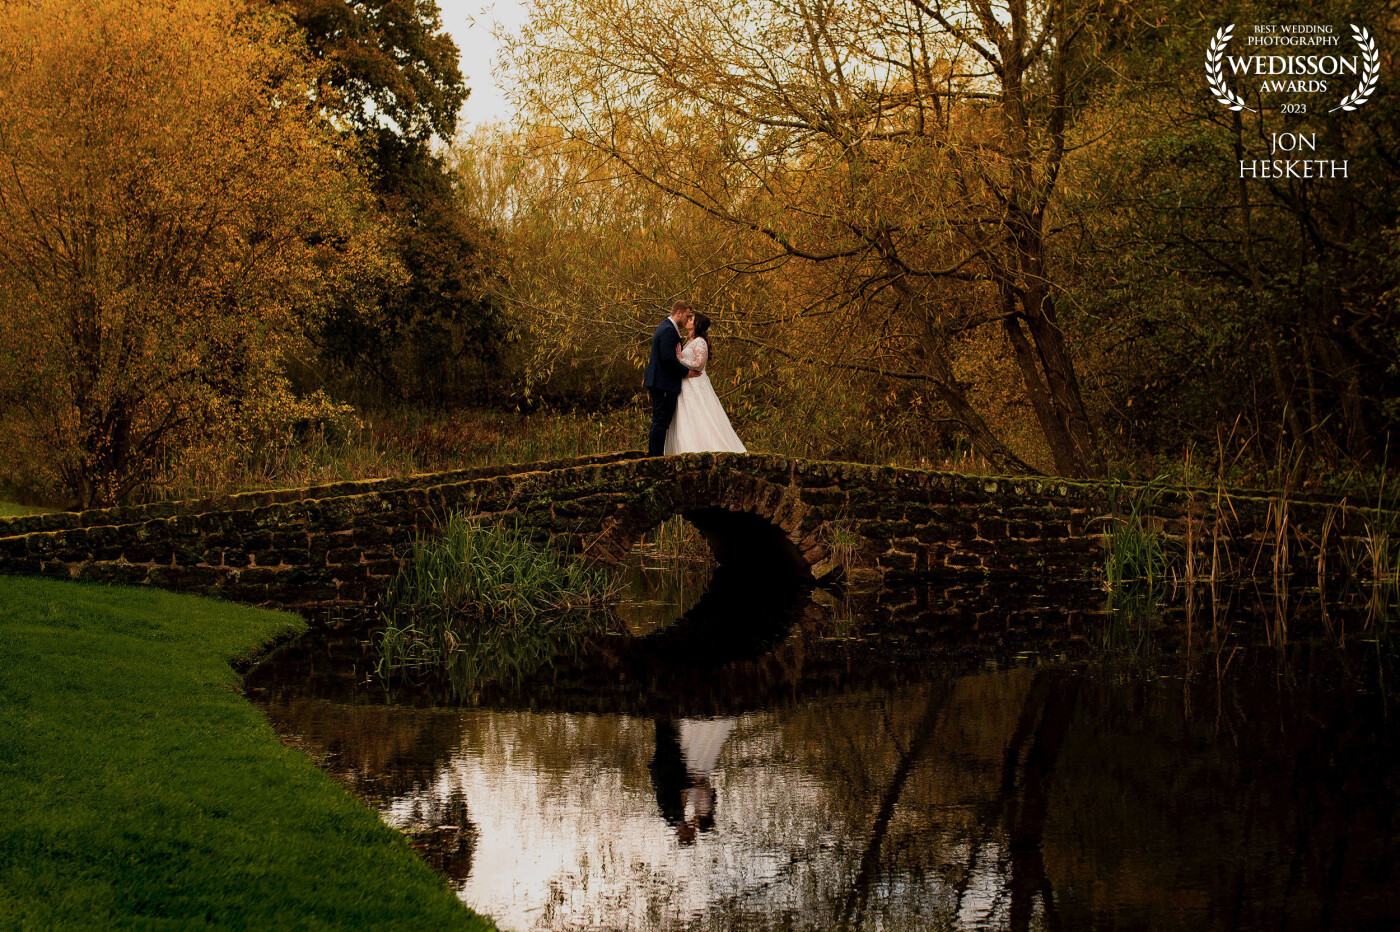 This was the second half of a post covid wedding which I was recommended for as the original photographer was pre booked. Carden Park has beautiful ground especially during autumn with all the colour on show.